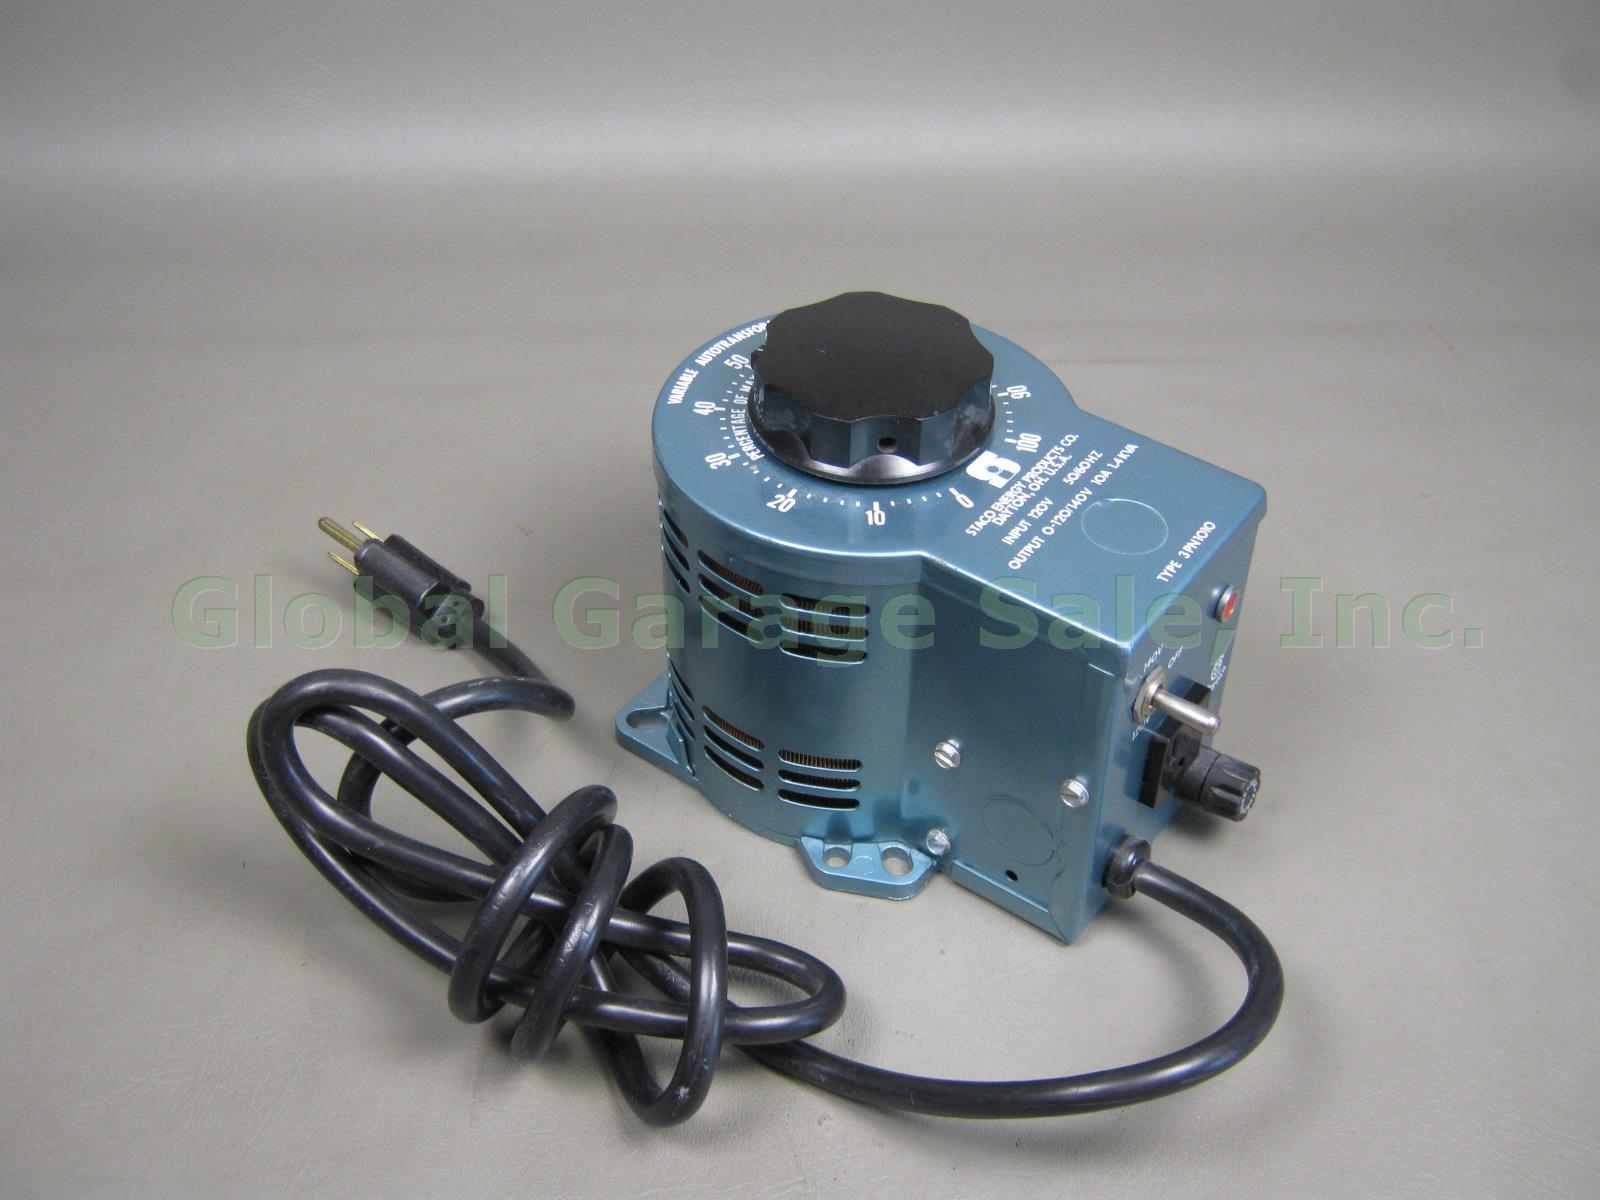 Staco Energy Products Co Variable Autotransformer Model Type 3PN1010 120V 50/60